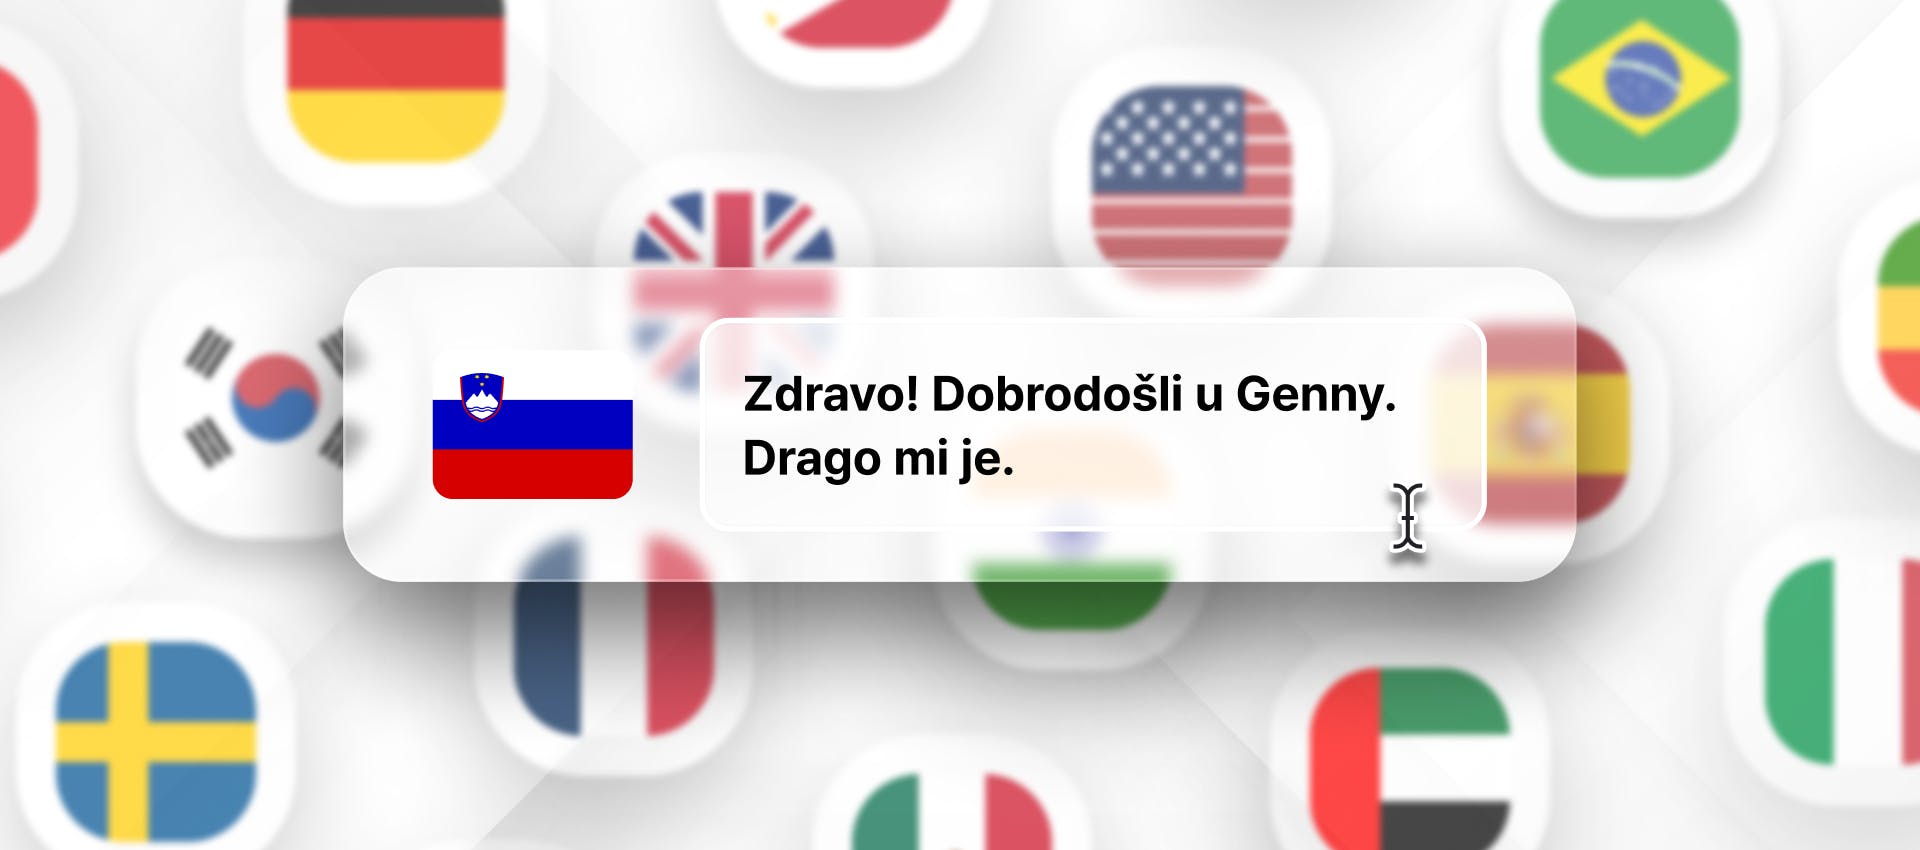 Slovenian phrase for Slovenian TTS generation with different flags in the background